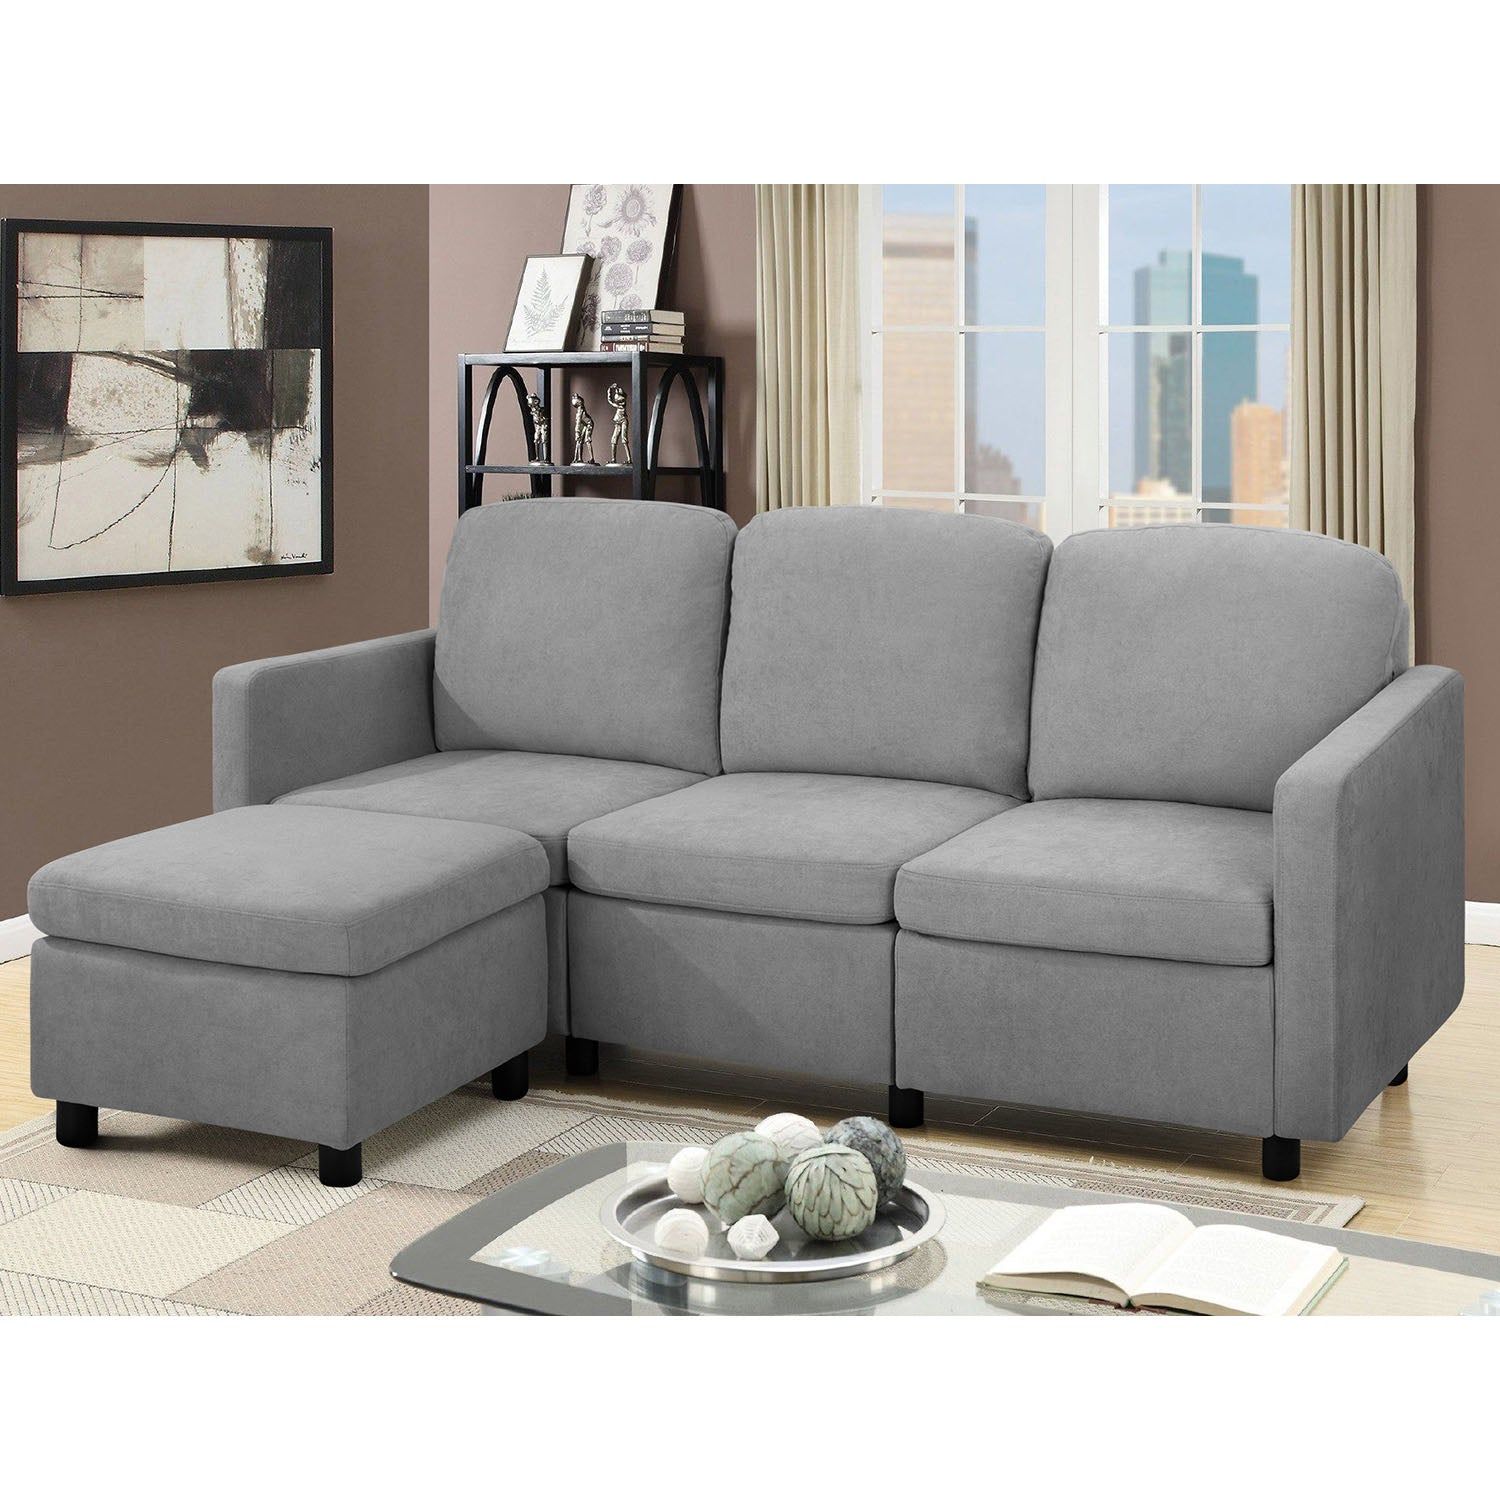 Homall Sectional Sofa Couch L Shaped Couch Modern Linen Fabric Convert With Regard To Convertible L Shaped Sectional Sofas (Gallery 20 of 20)